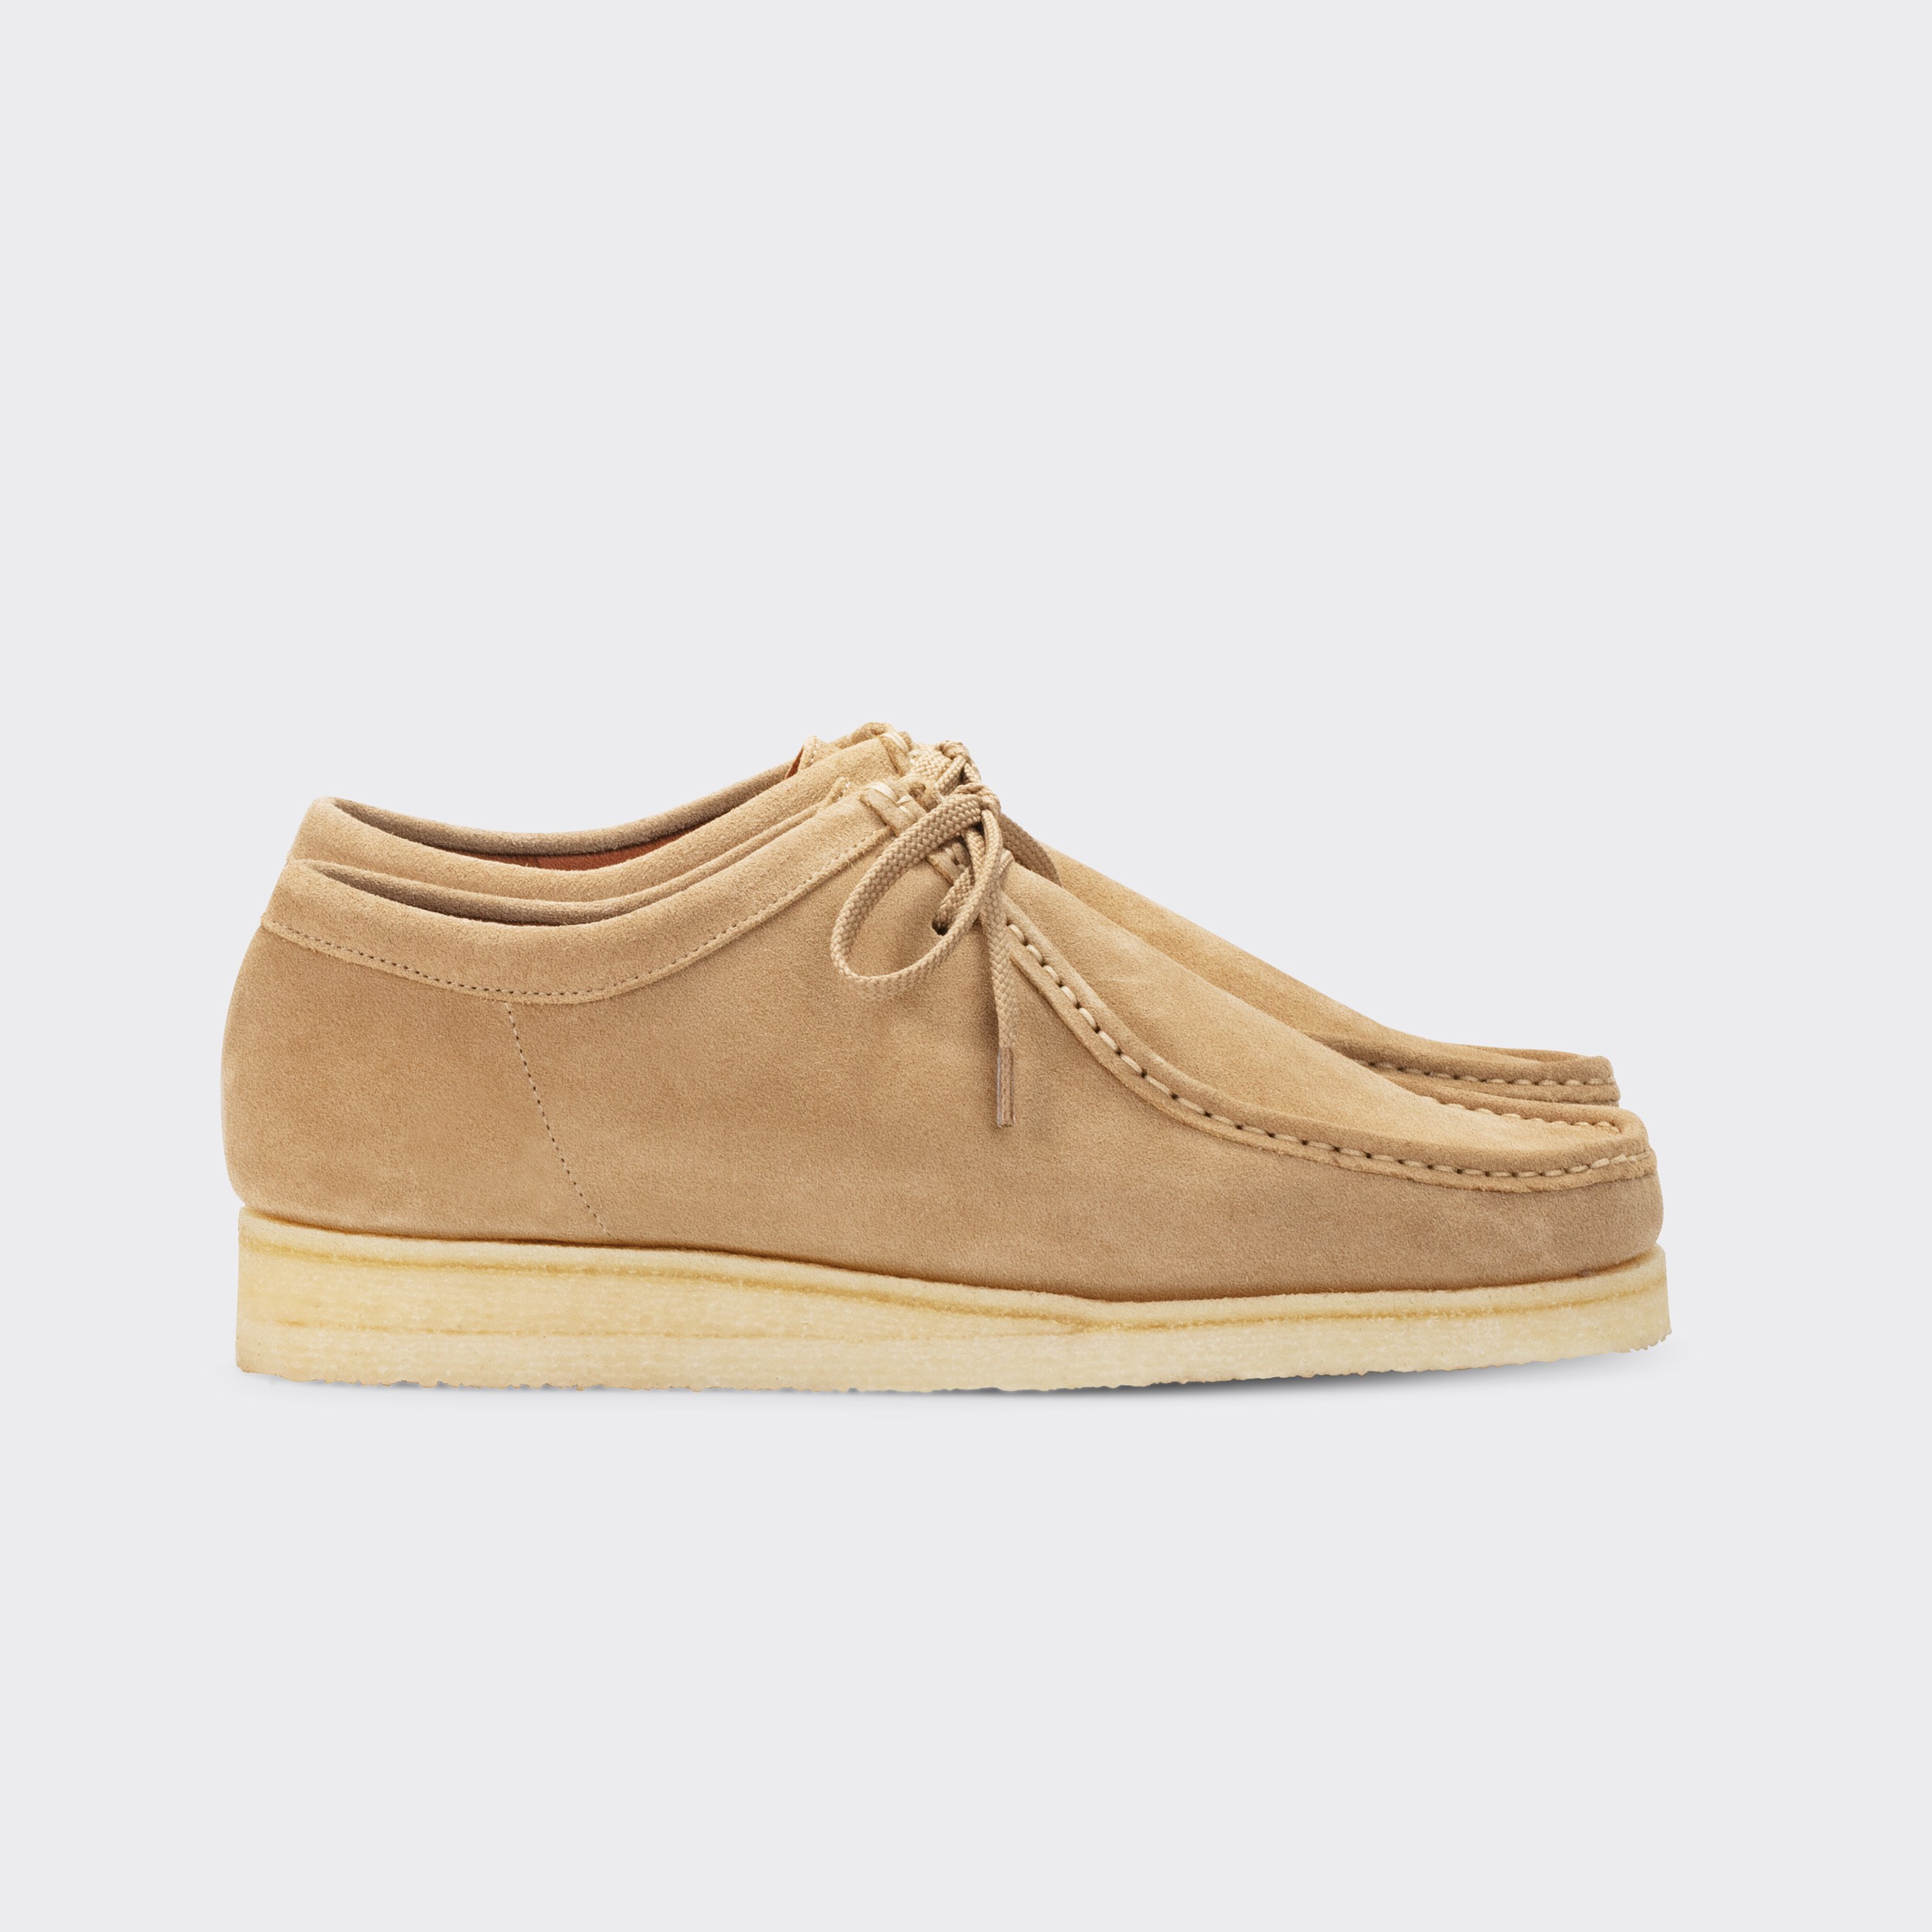 who sells wallabee shoes